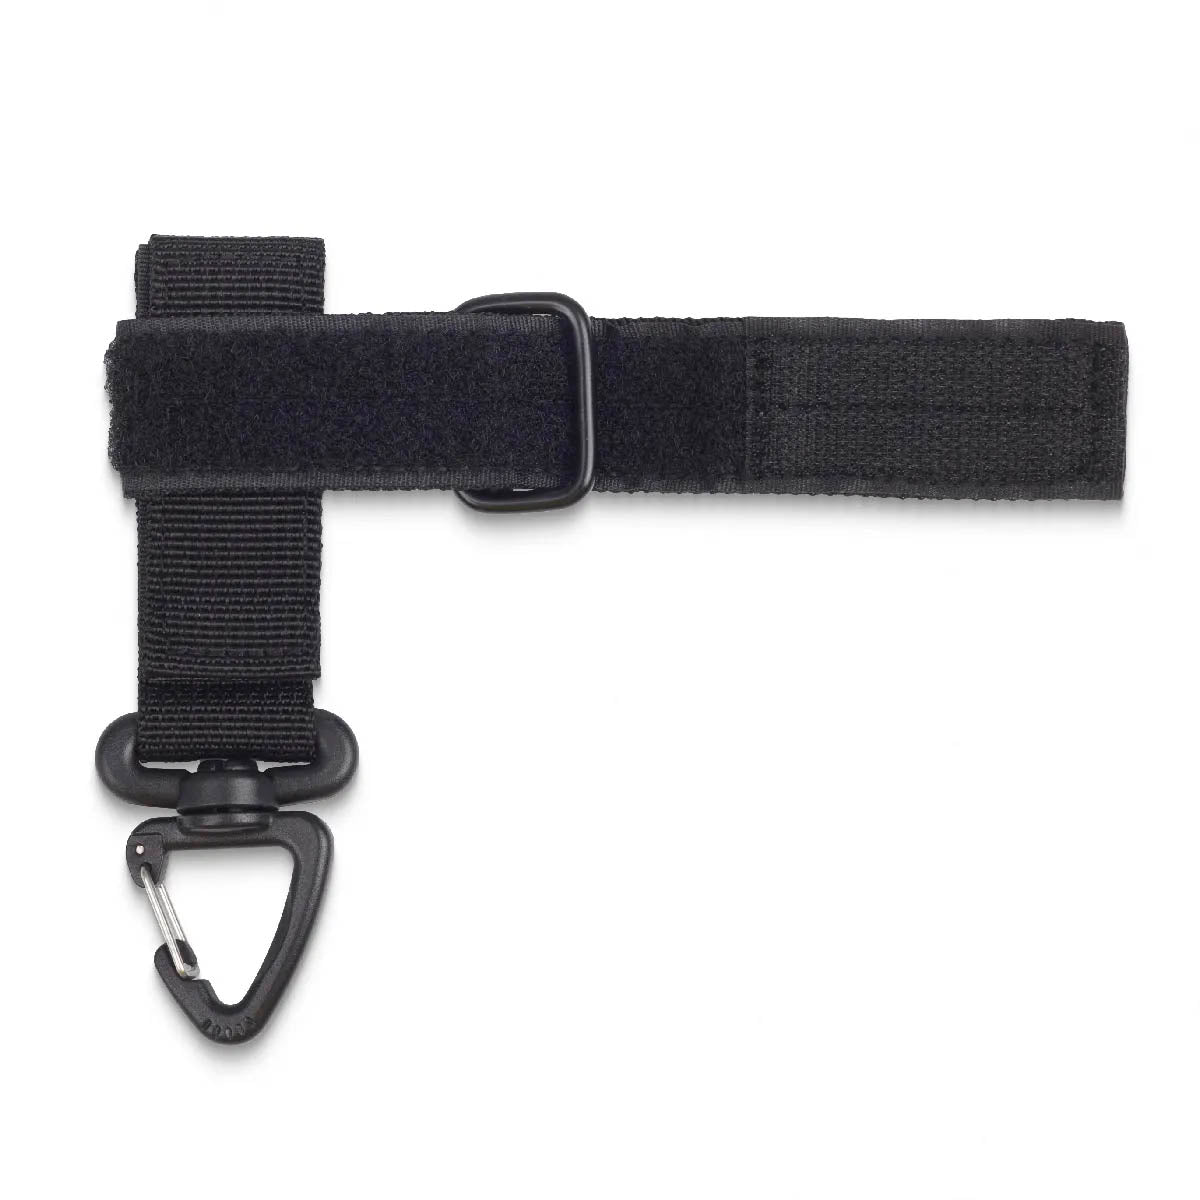 Glove Holder/Rope Accessory w/ Multi-Use Carabiner - Black Polyester